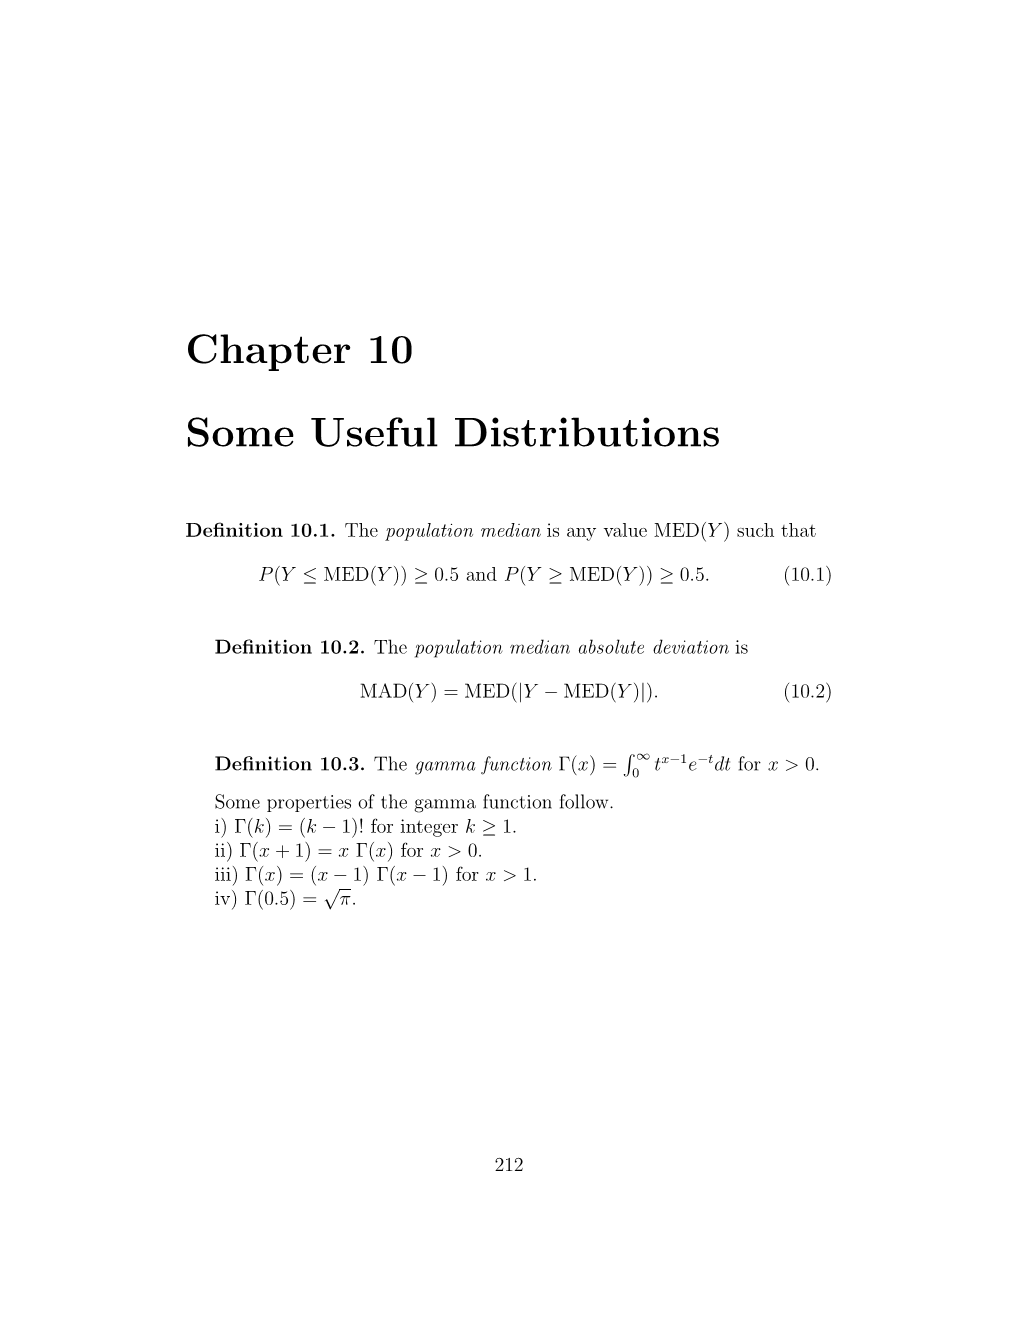 Chapter 10 Some Useful Distributions